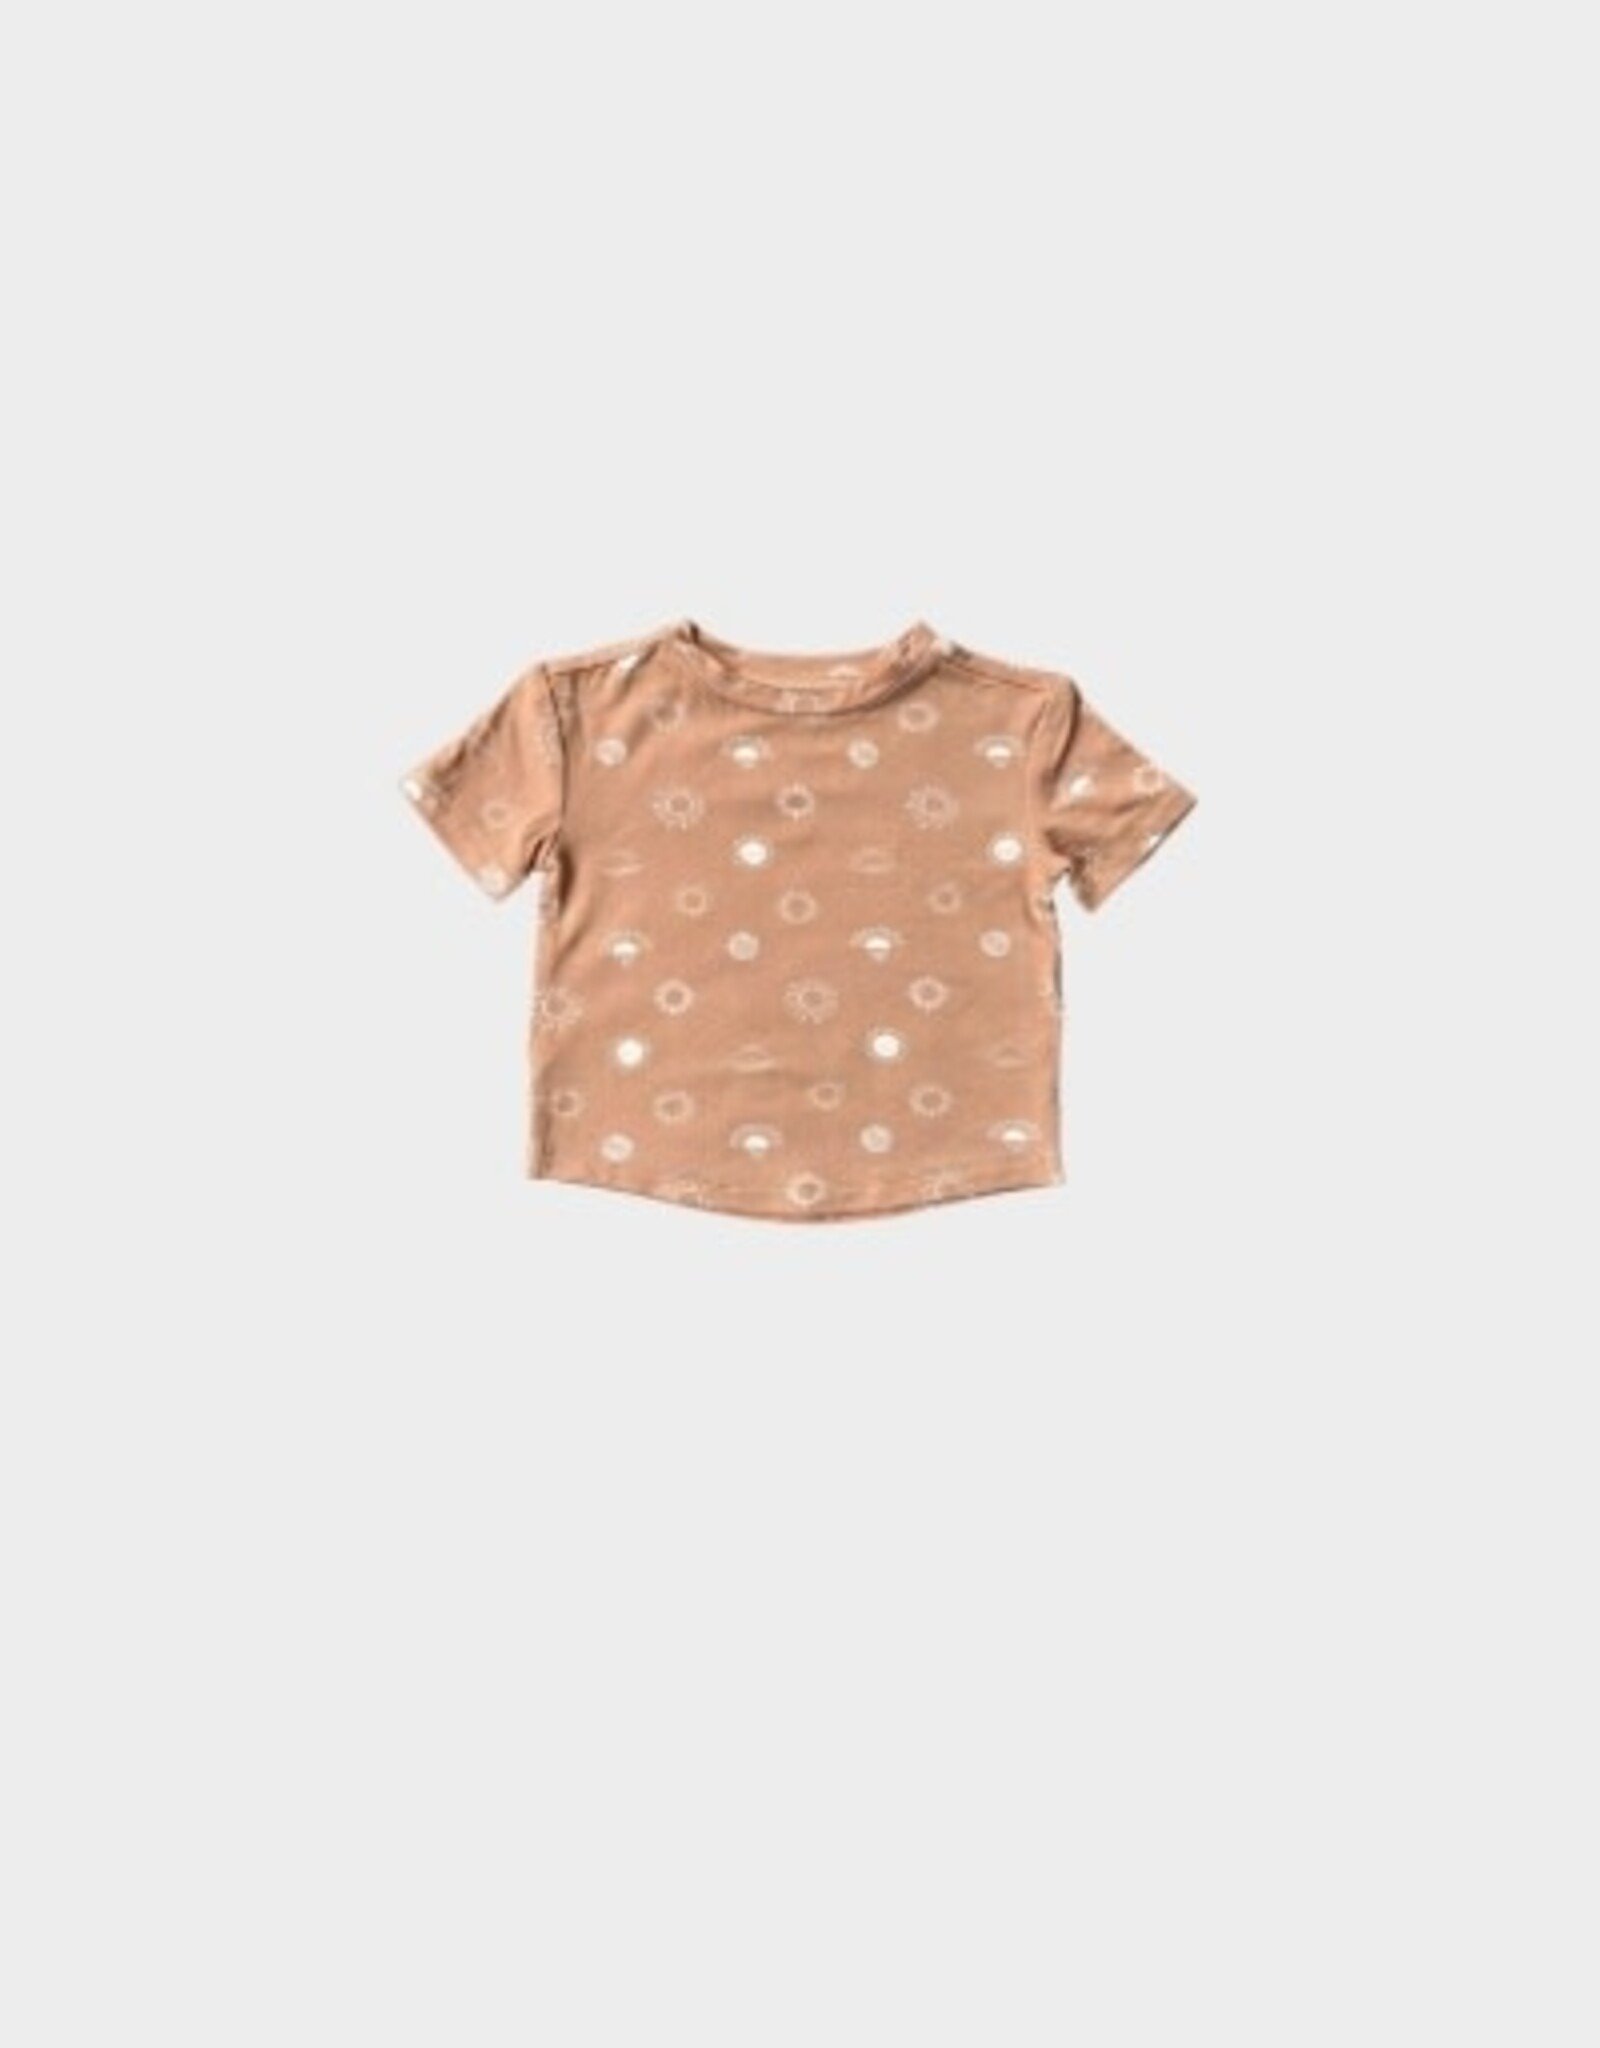 Babysprouts BOXY TEE